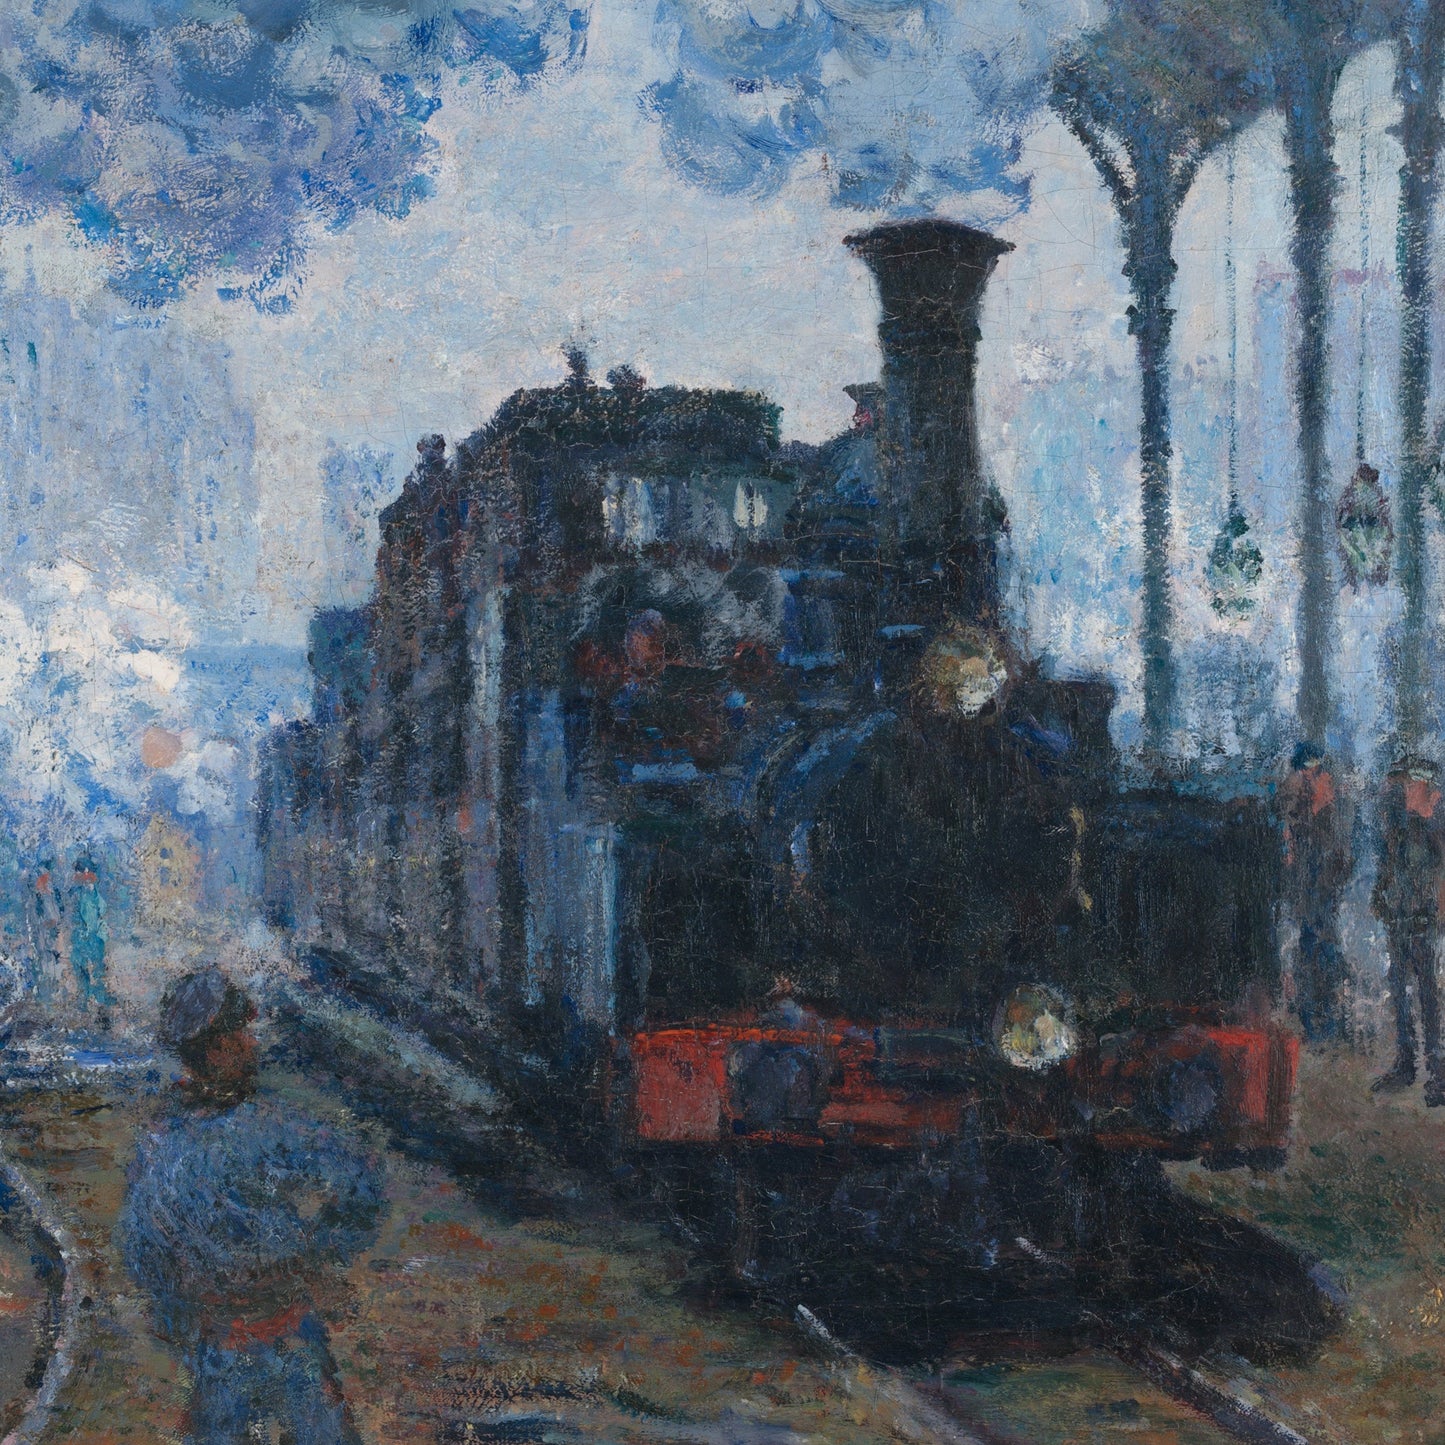 The Gare Saint-Lazare Arrival by Claude Monet, 3d Printed with texture and brush strokes looks like original oil-painting, code:131